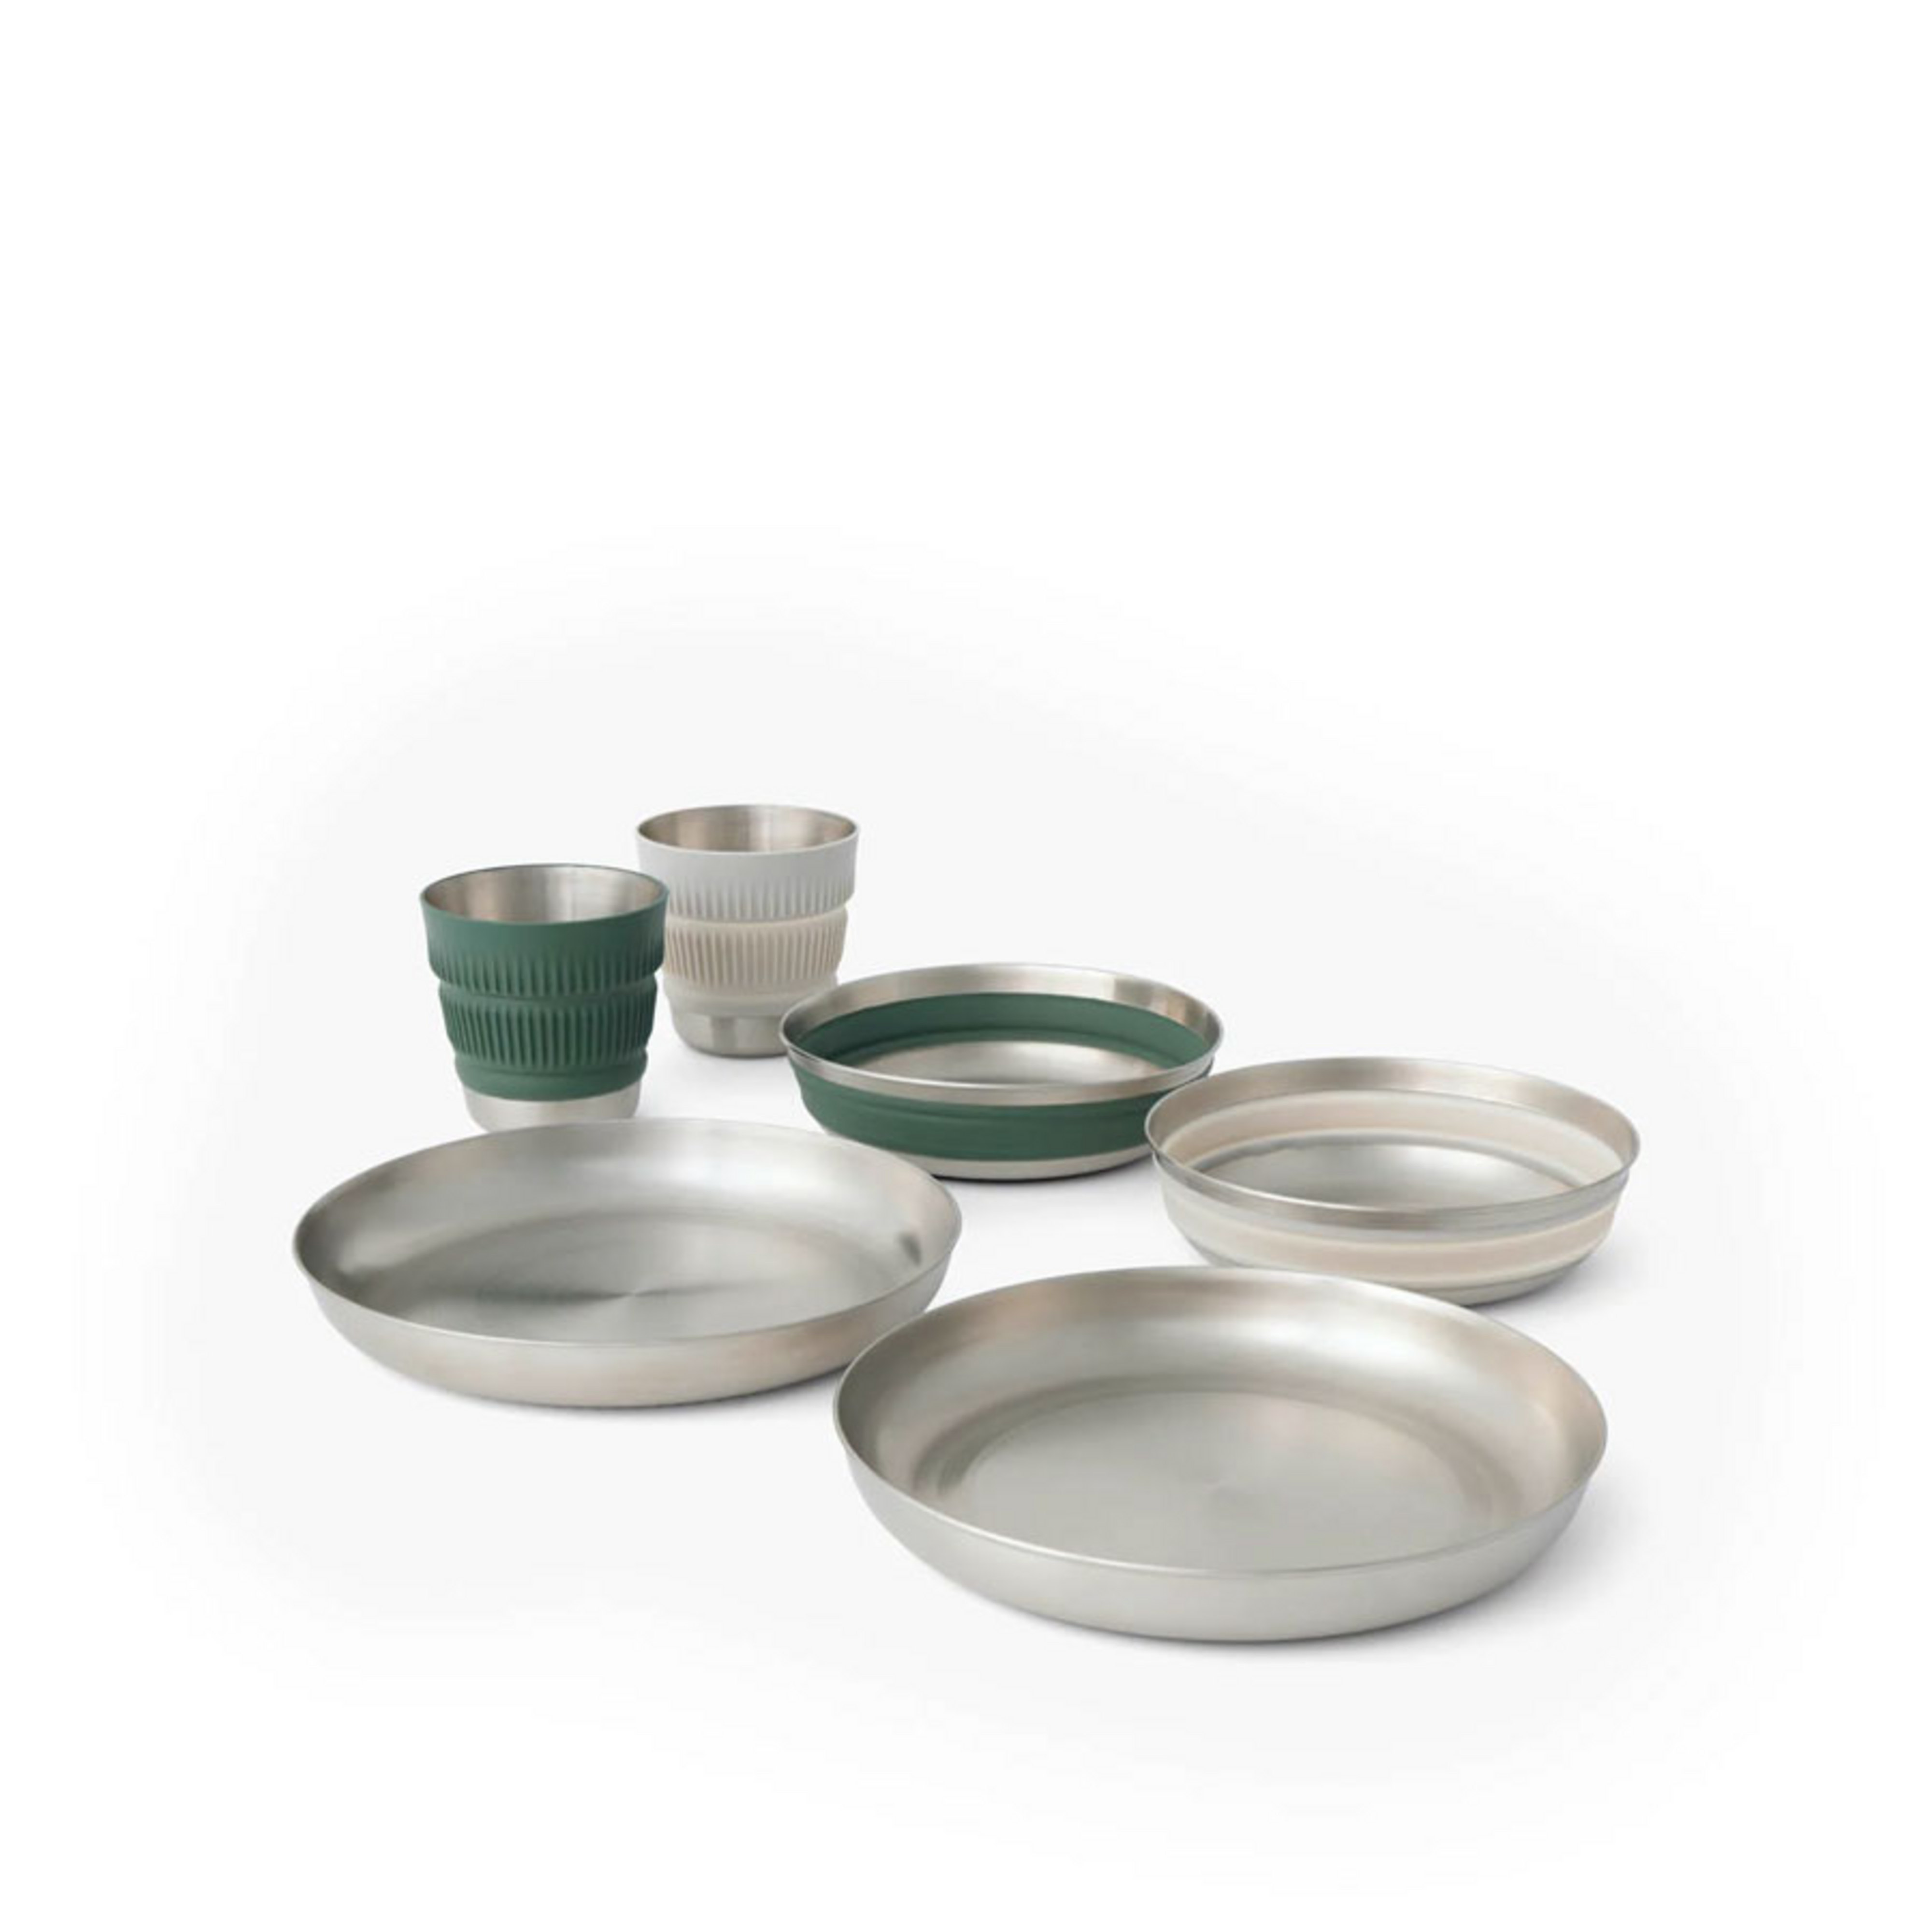 Sea To Summit Detour Stainless Steel Collapsible Dinnerware Set-6 Piece